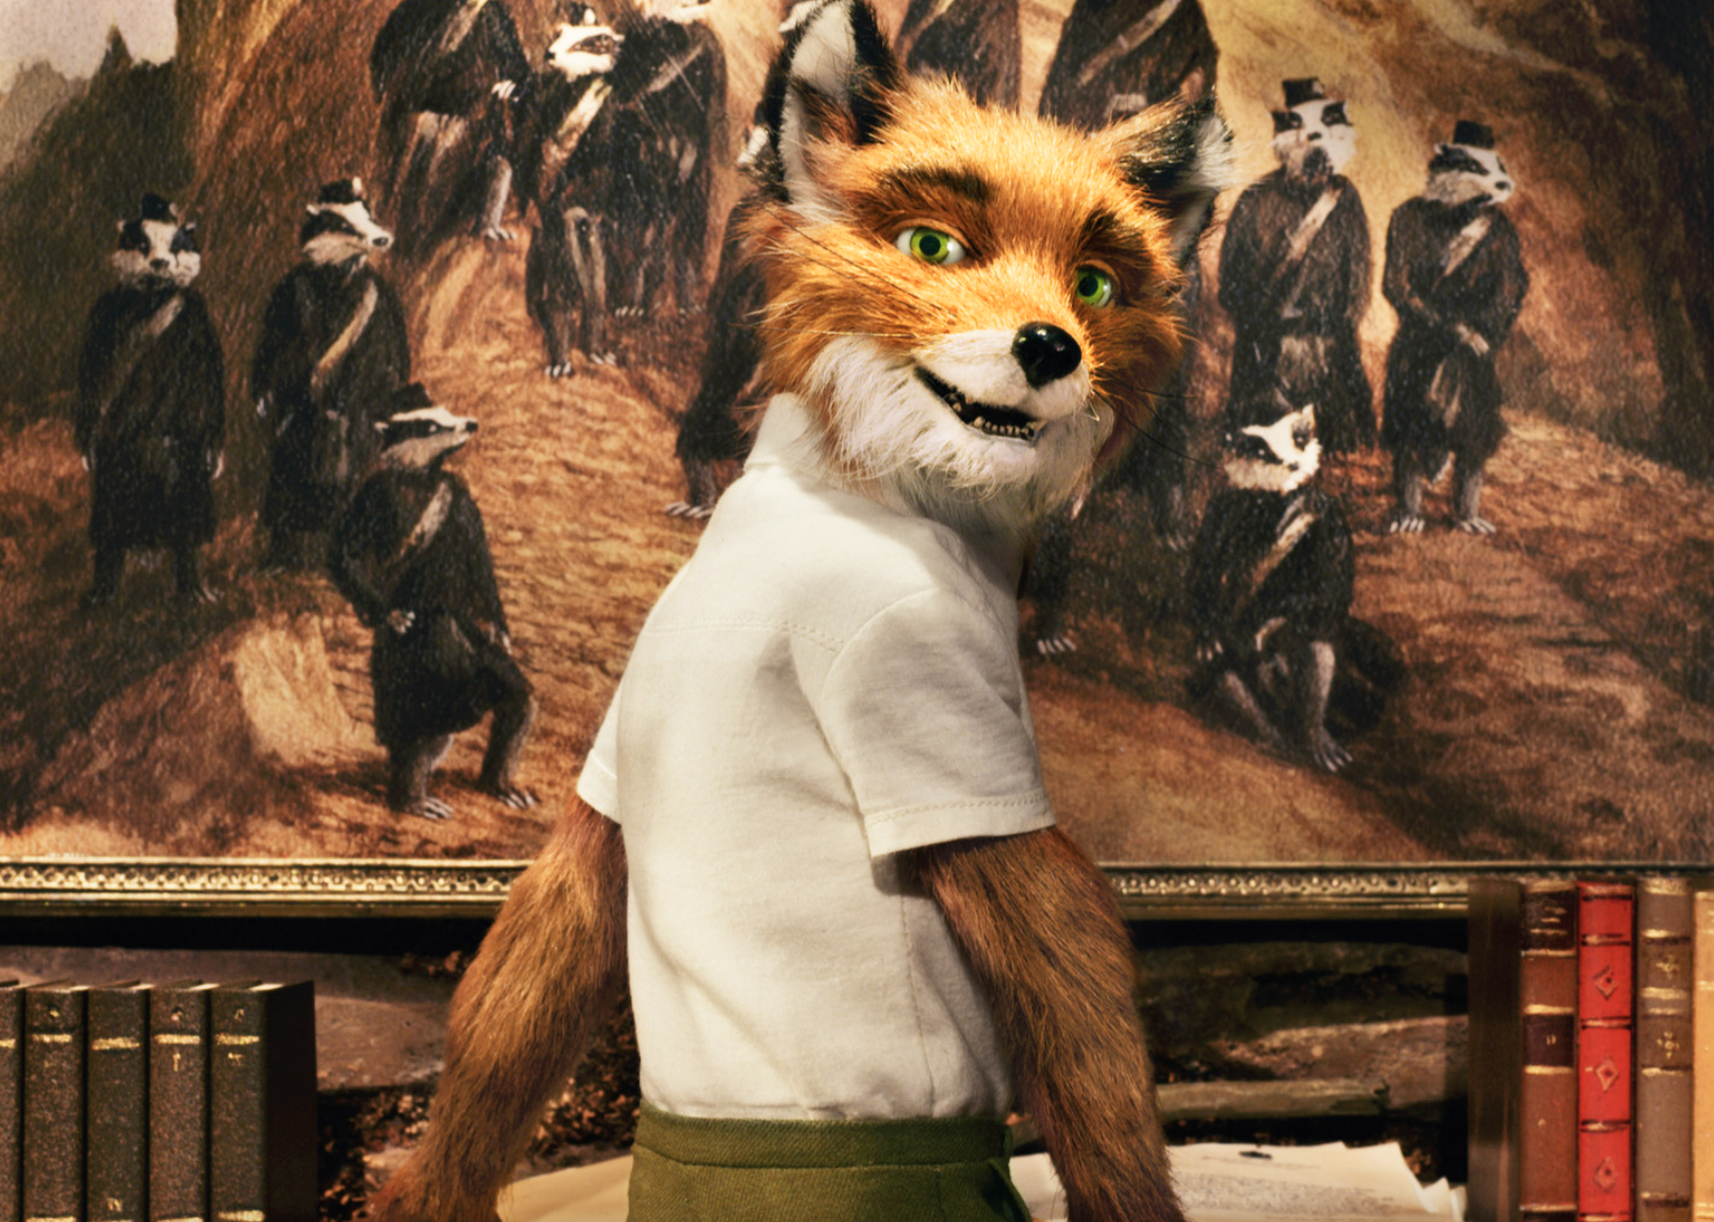 A scene with George Clooney's character in "Fantastic Mr. Fox"